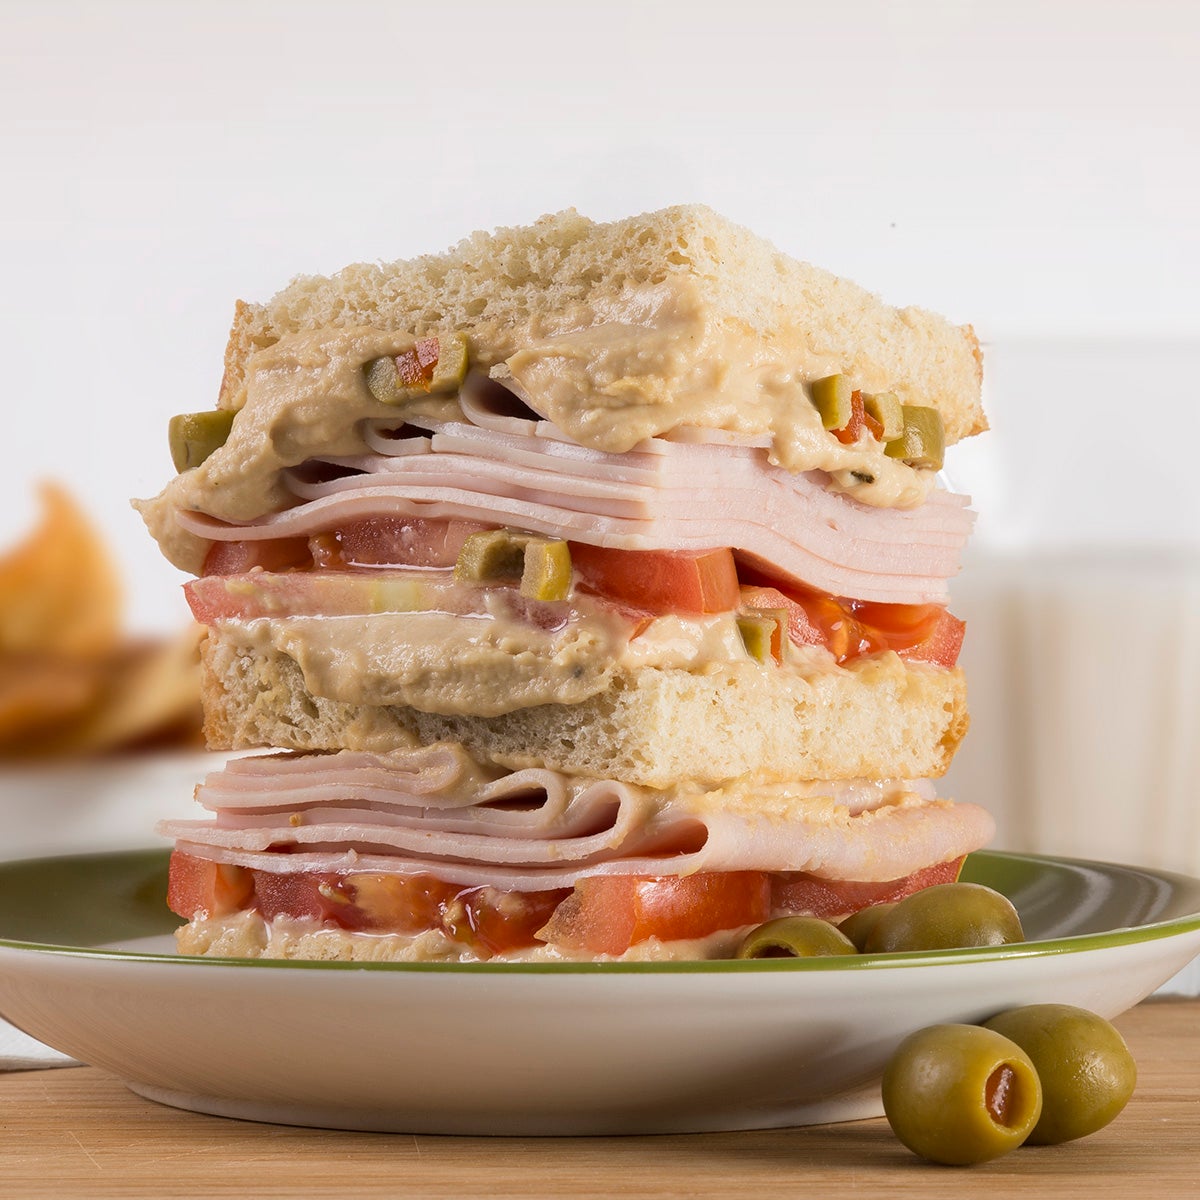 The Loaded Turkey and Hummus Sandwich